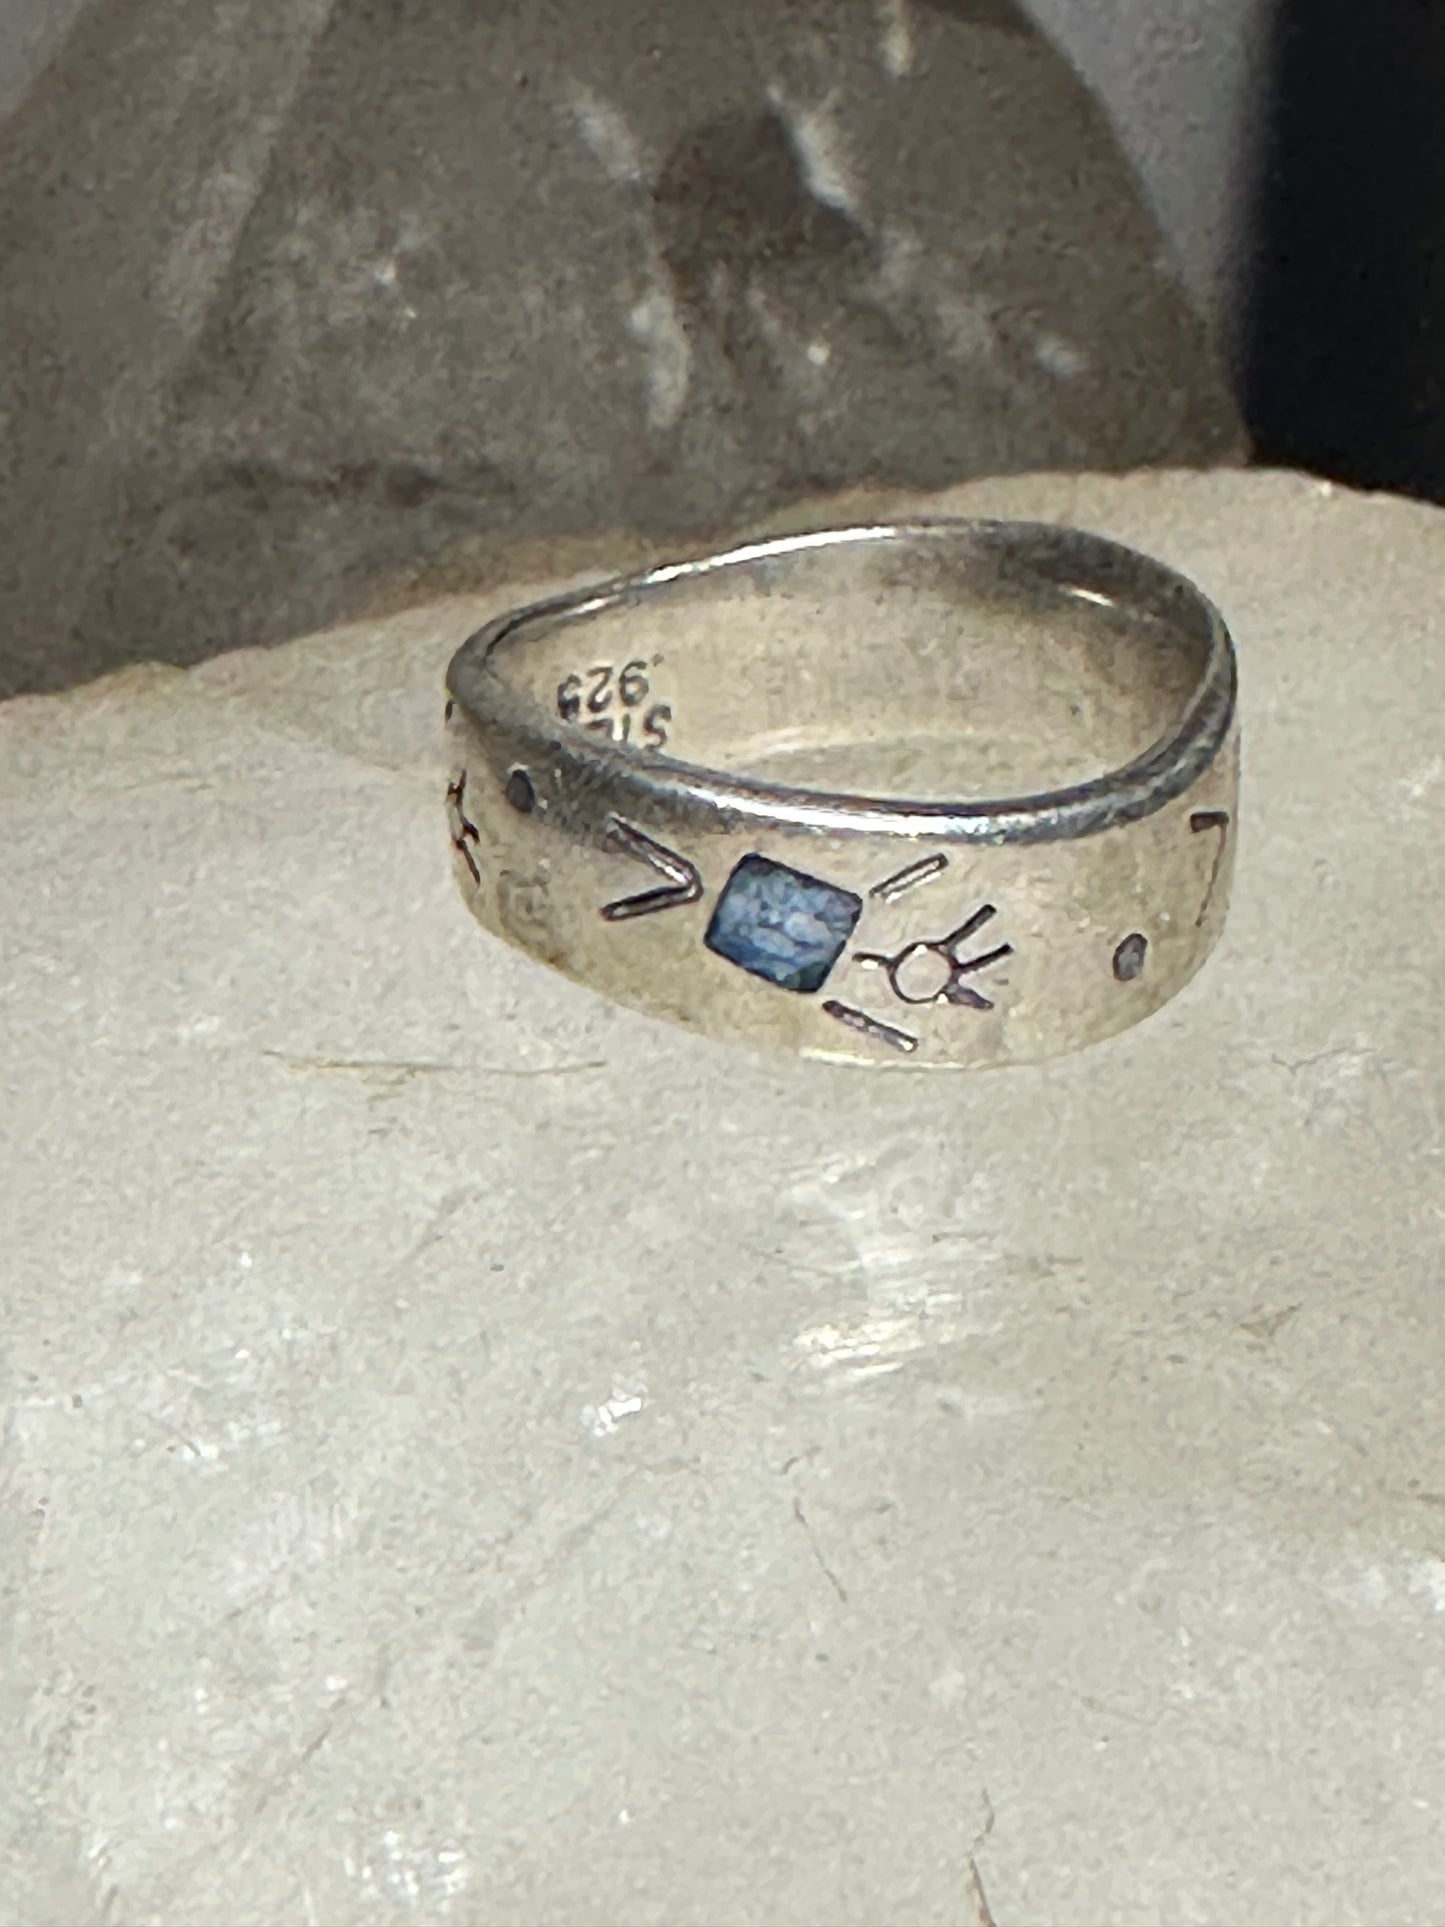 Figurative ring happy stick figure band  blue stone inlay size 6 sterling silver women girls